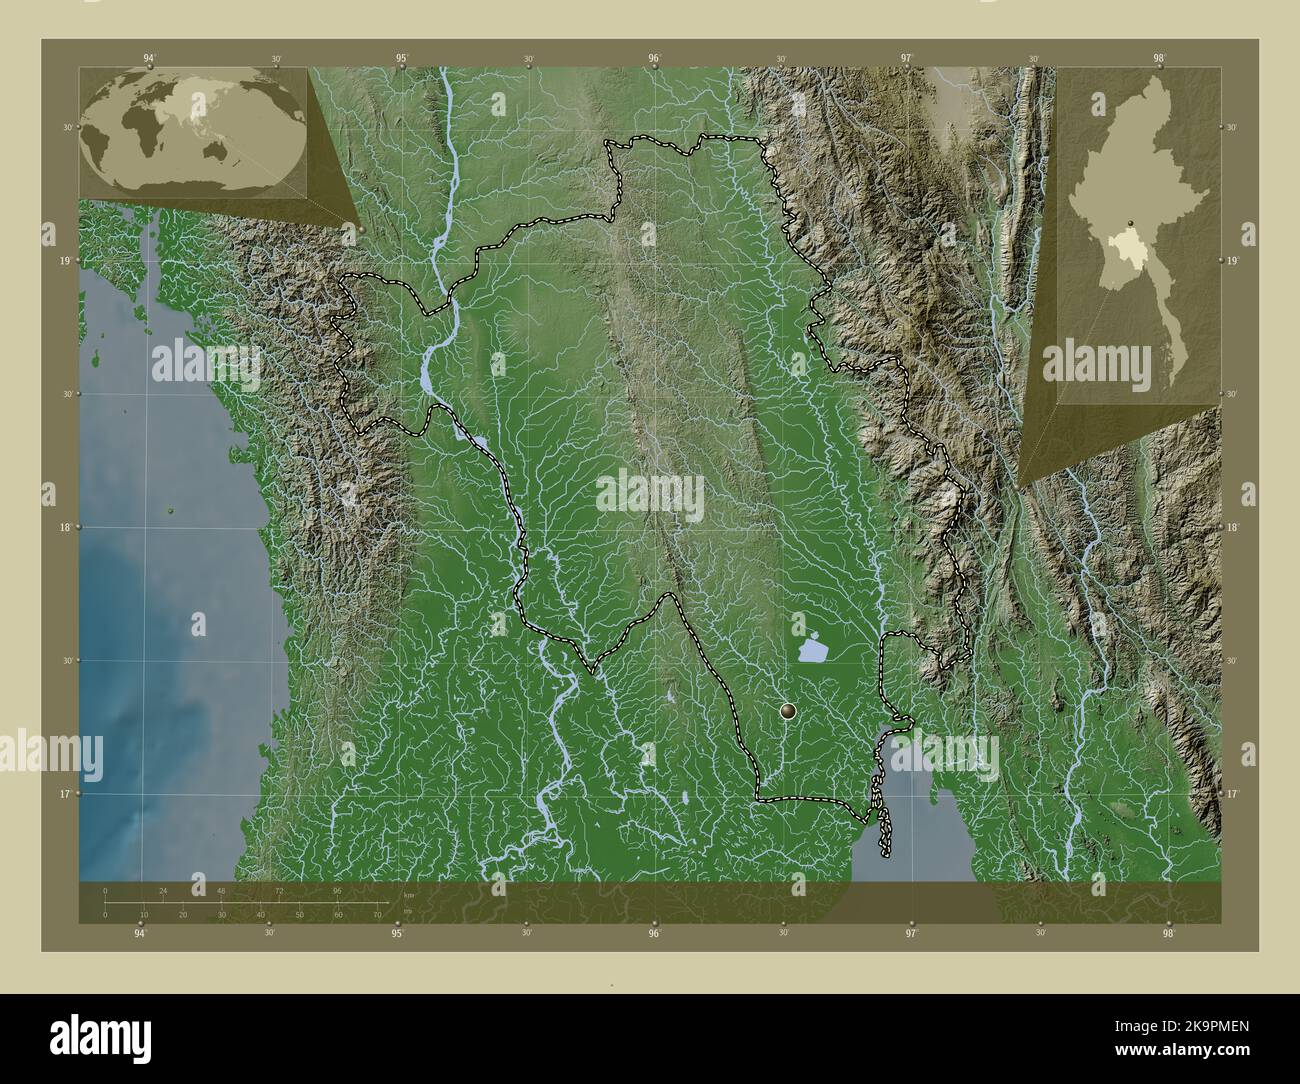 Bago Division Of Myanmar Elevation Map Colored In Wiki Style With